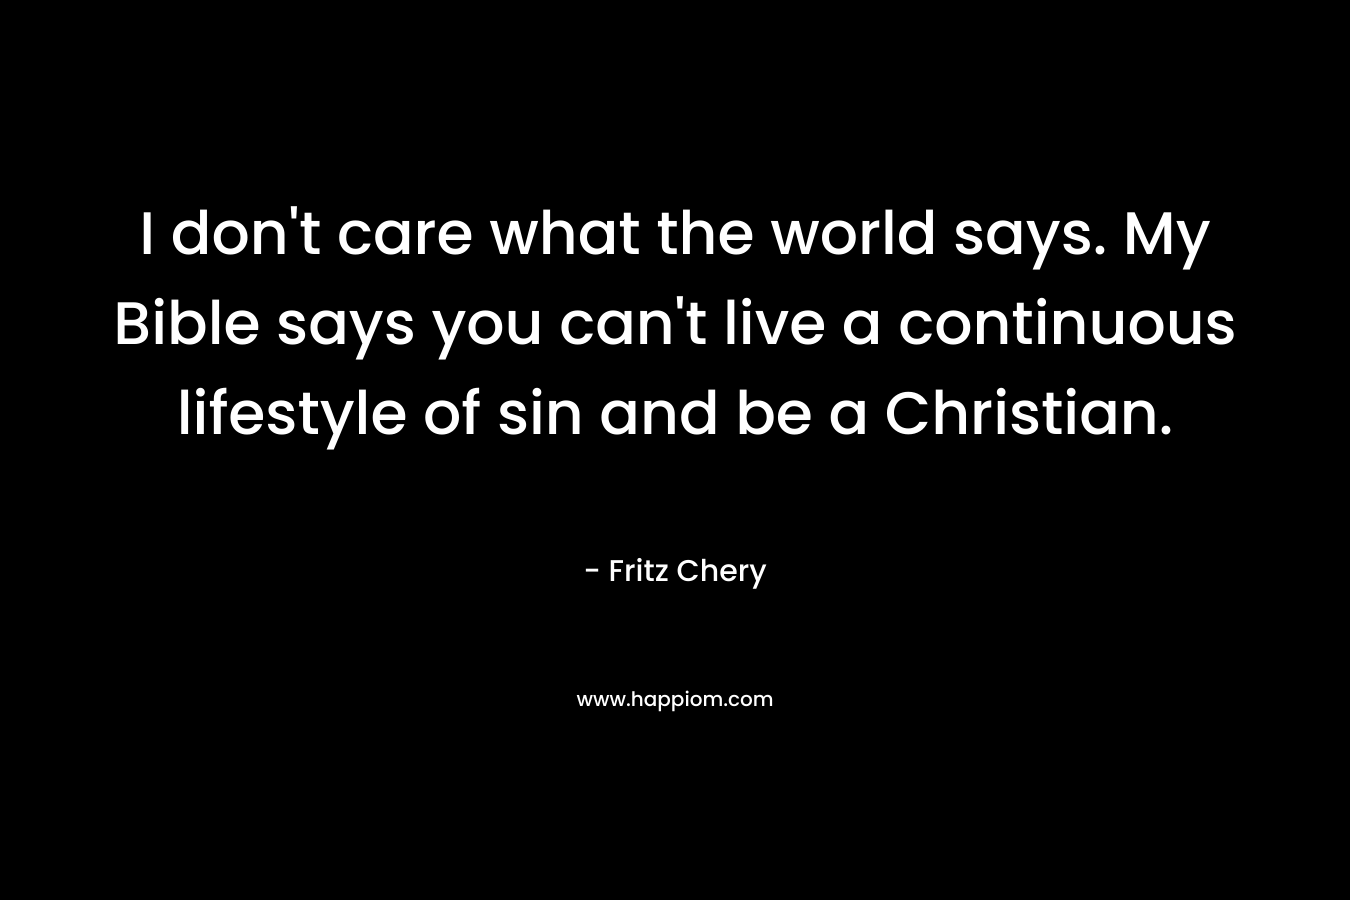 I don't care what the world says. My Bible says you can't live a continuous lifestyle of sin and be a Christian.